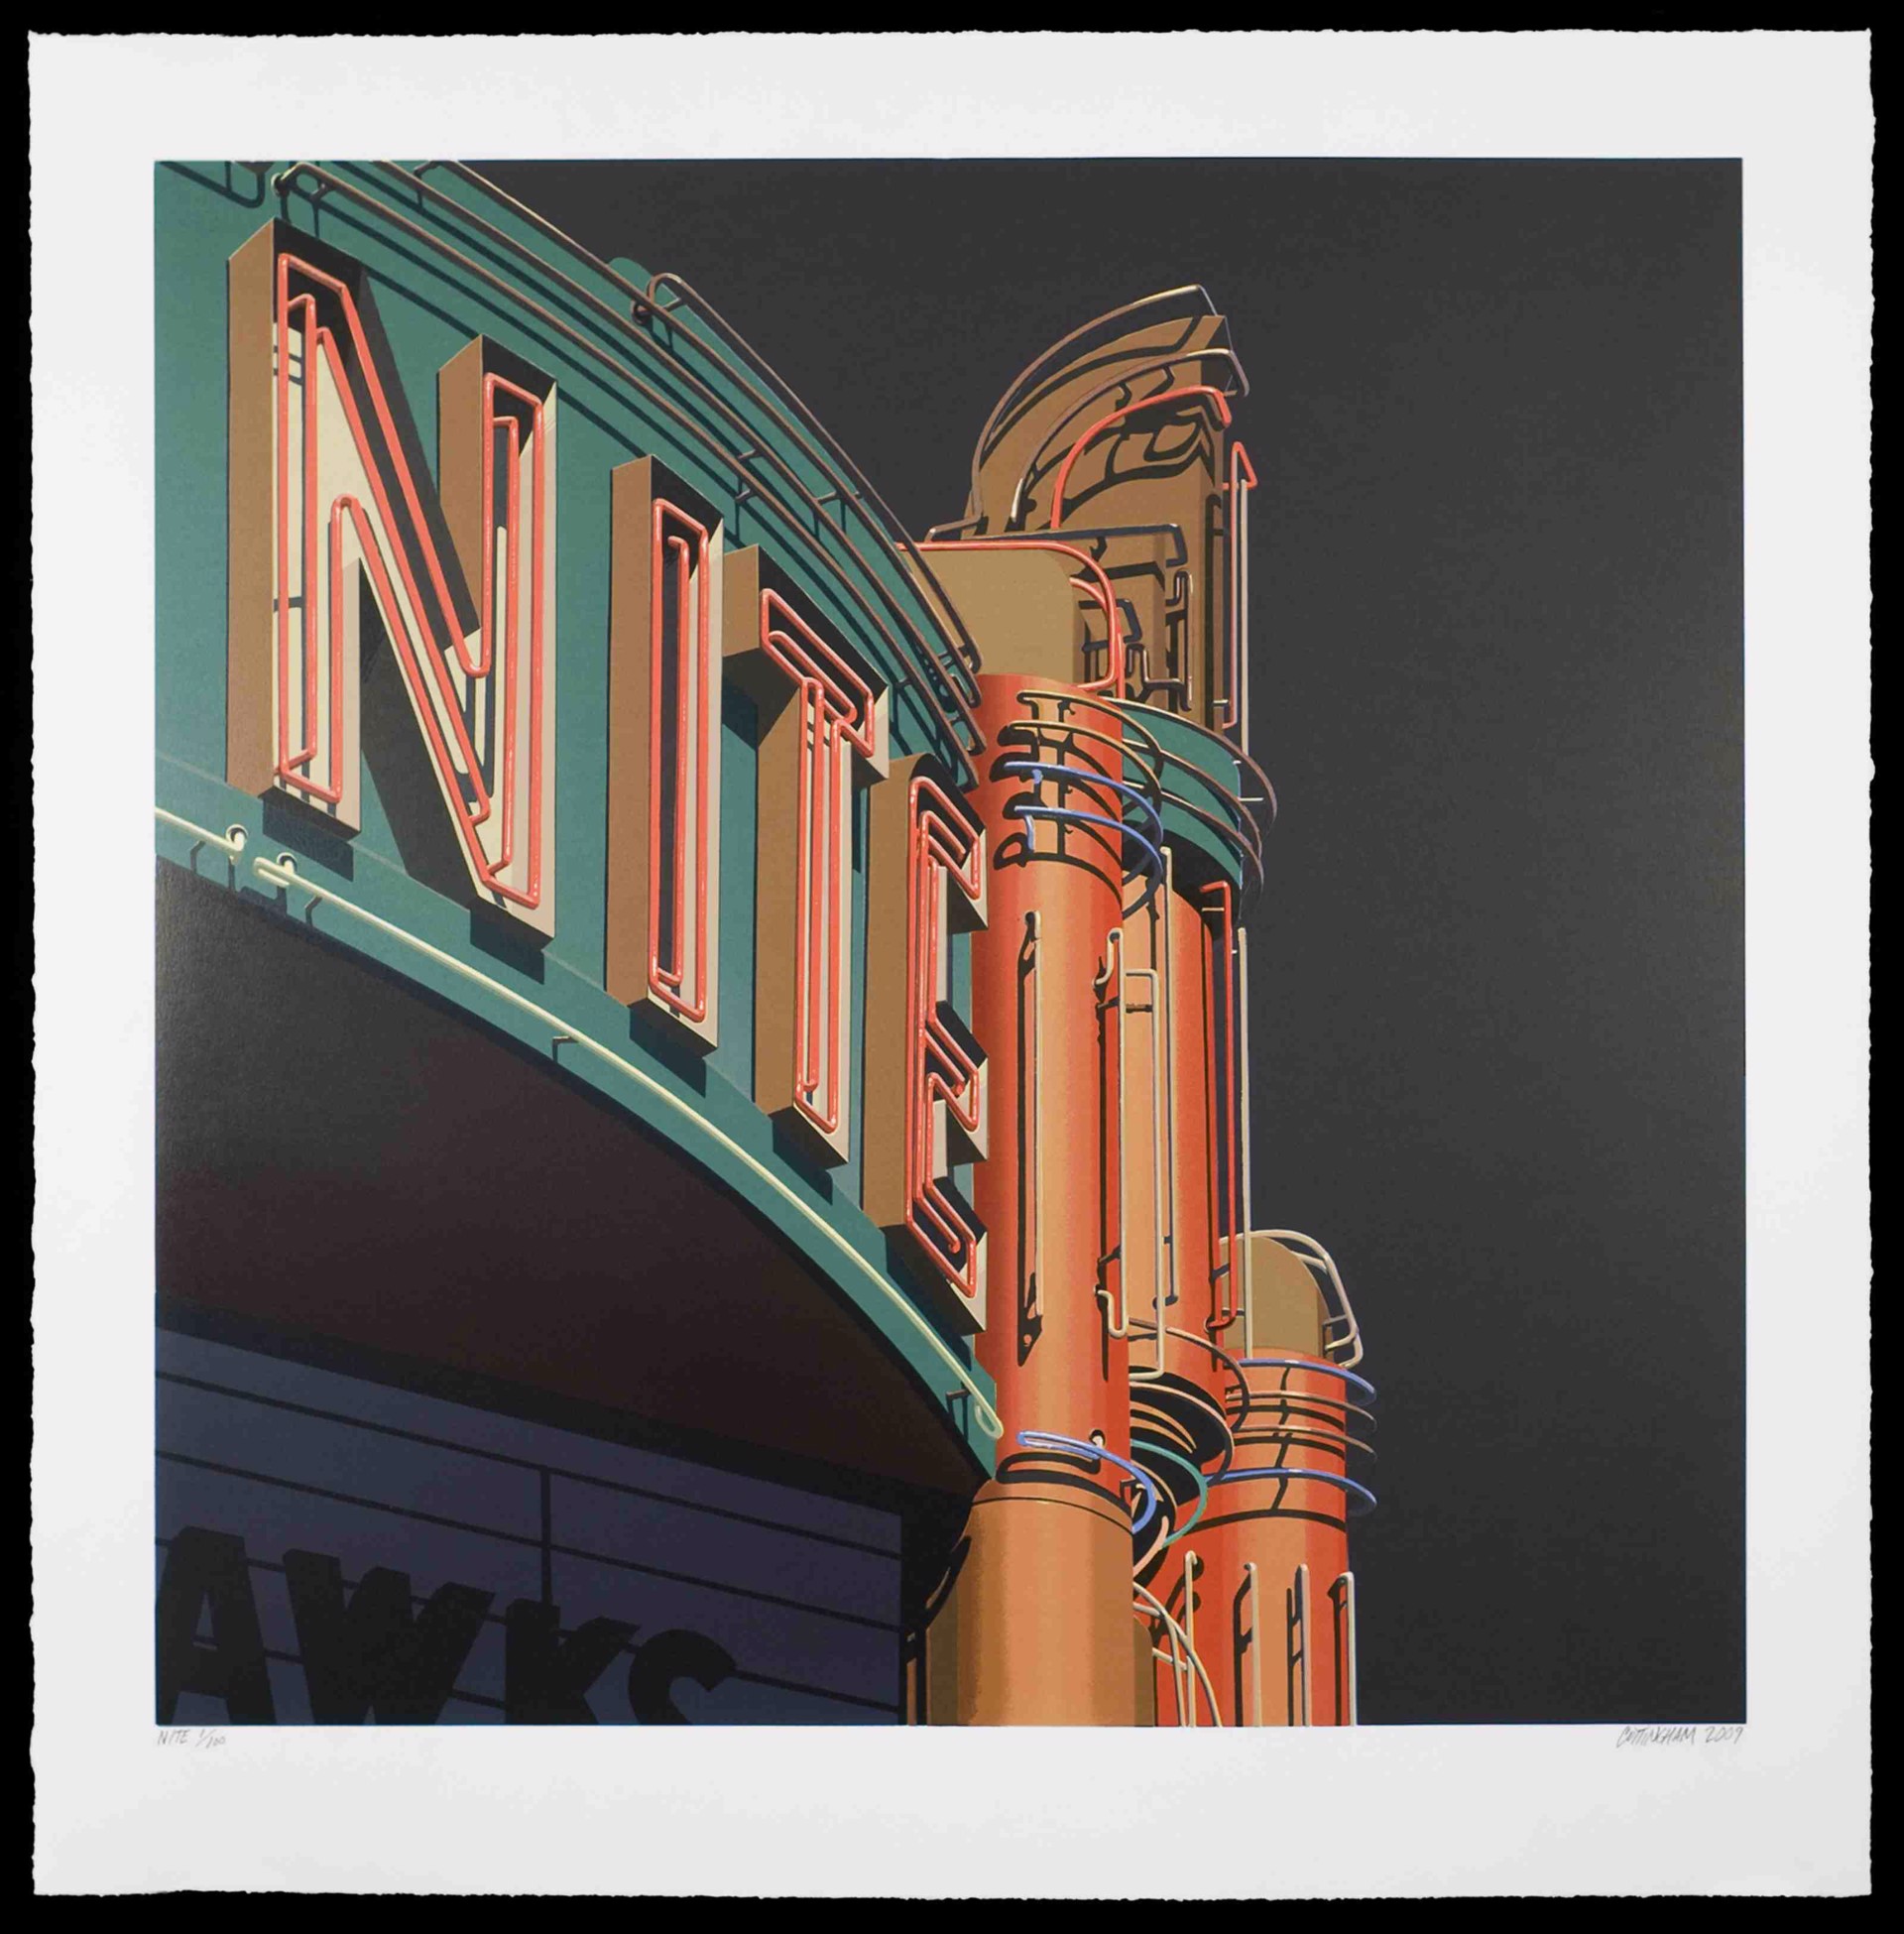 Nite (from American Signs portfolio) by Robert Cottingham